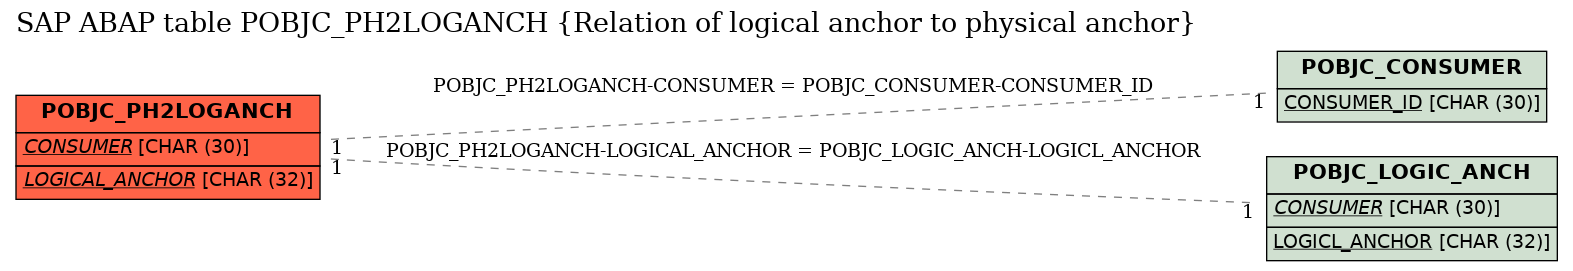 E-R Diagram for table POBJC_PH2LOGANCH (Relation of logical anchor to physical anchor)